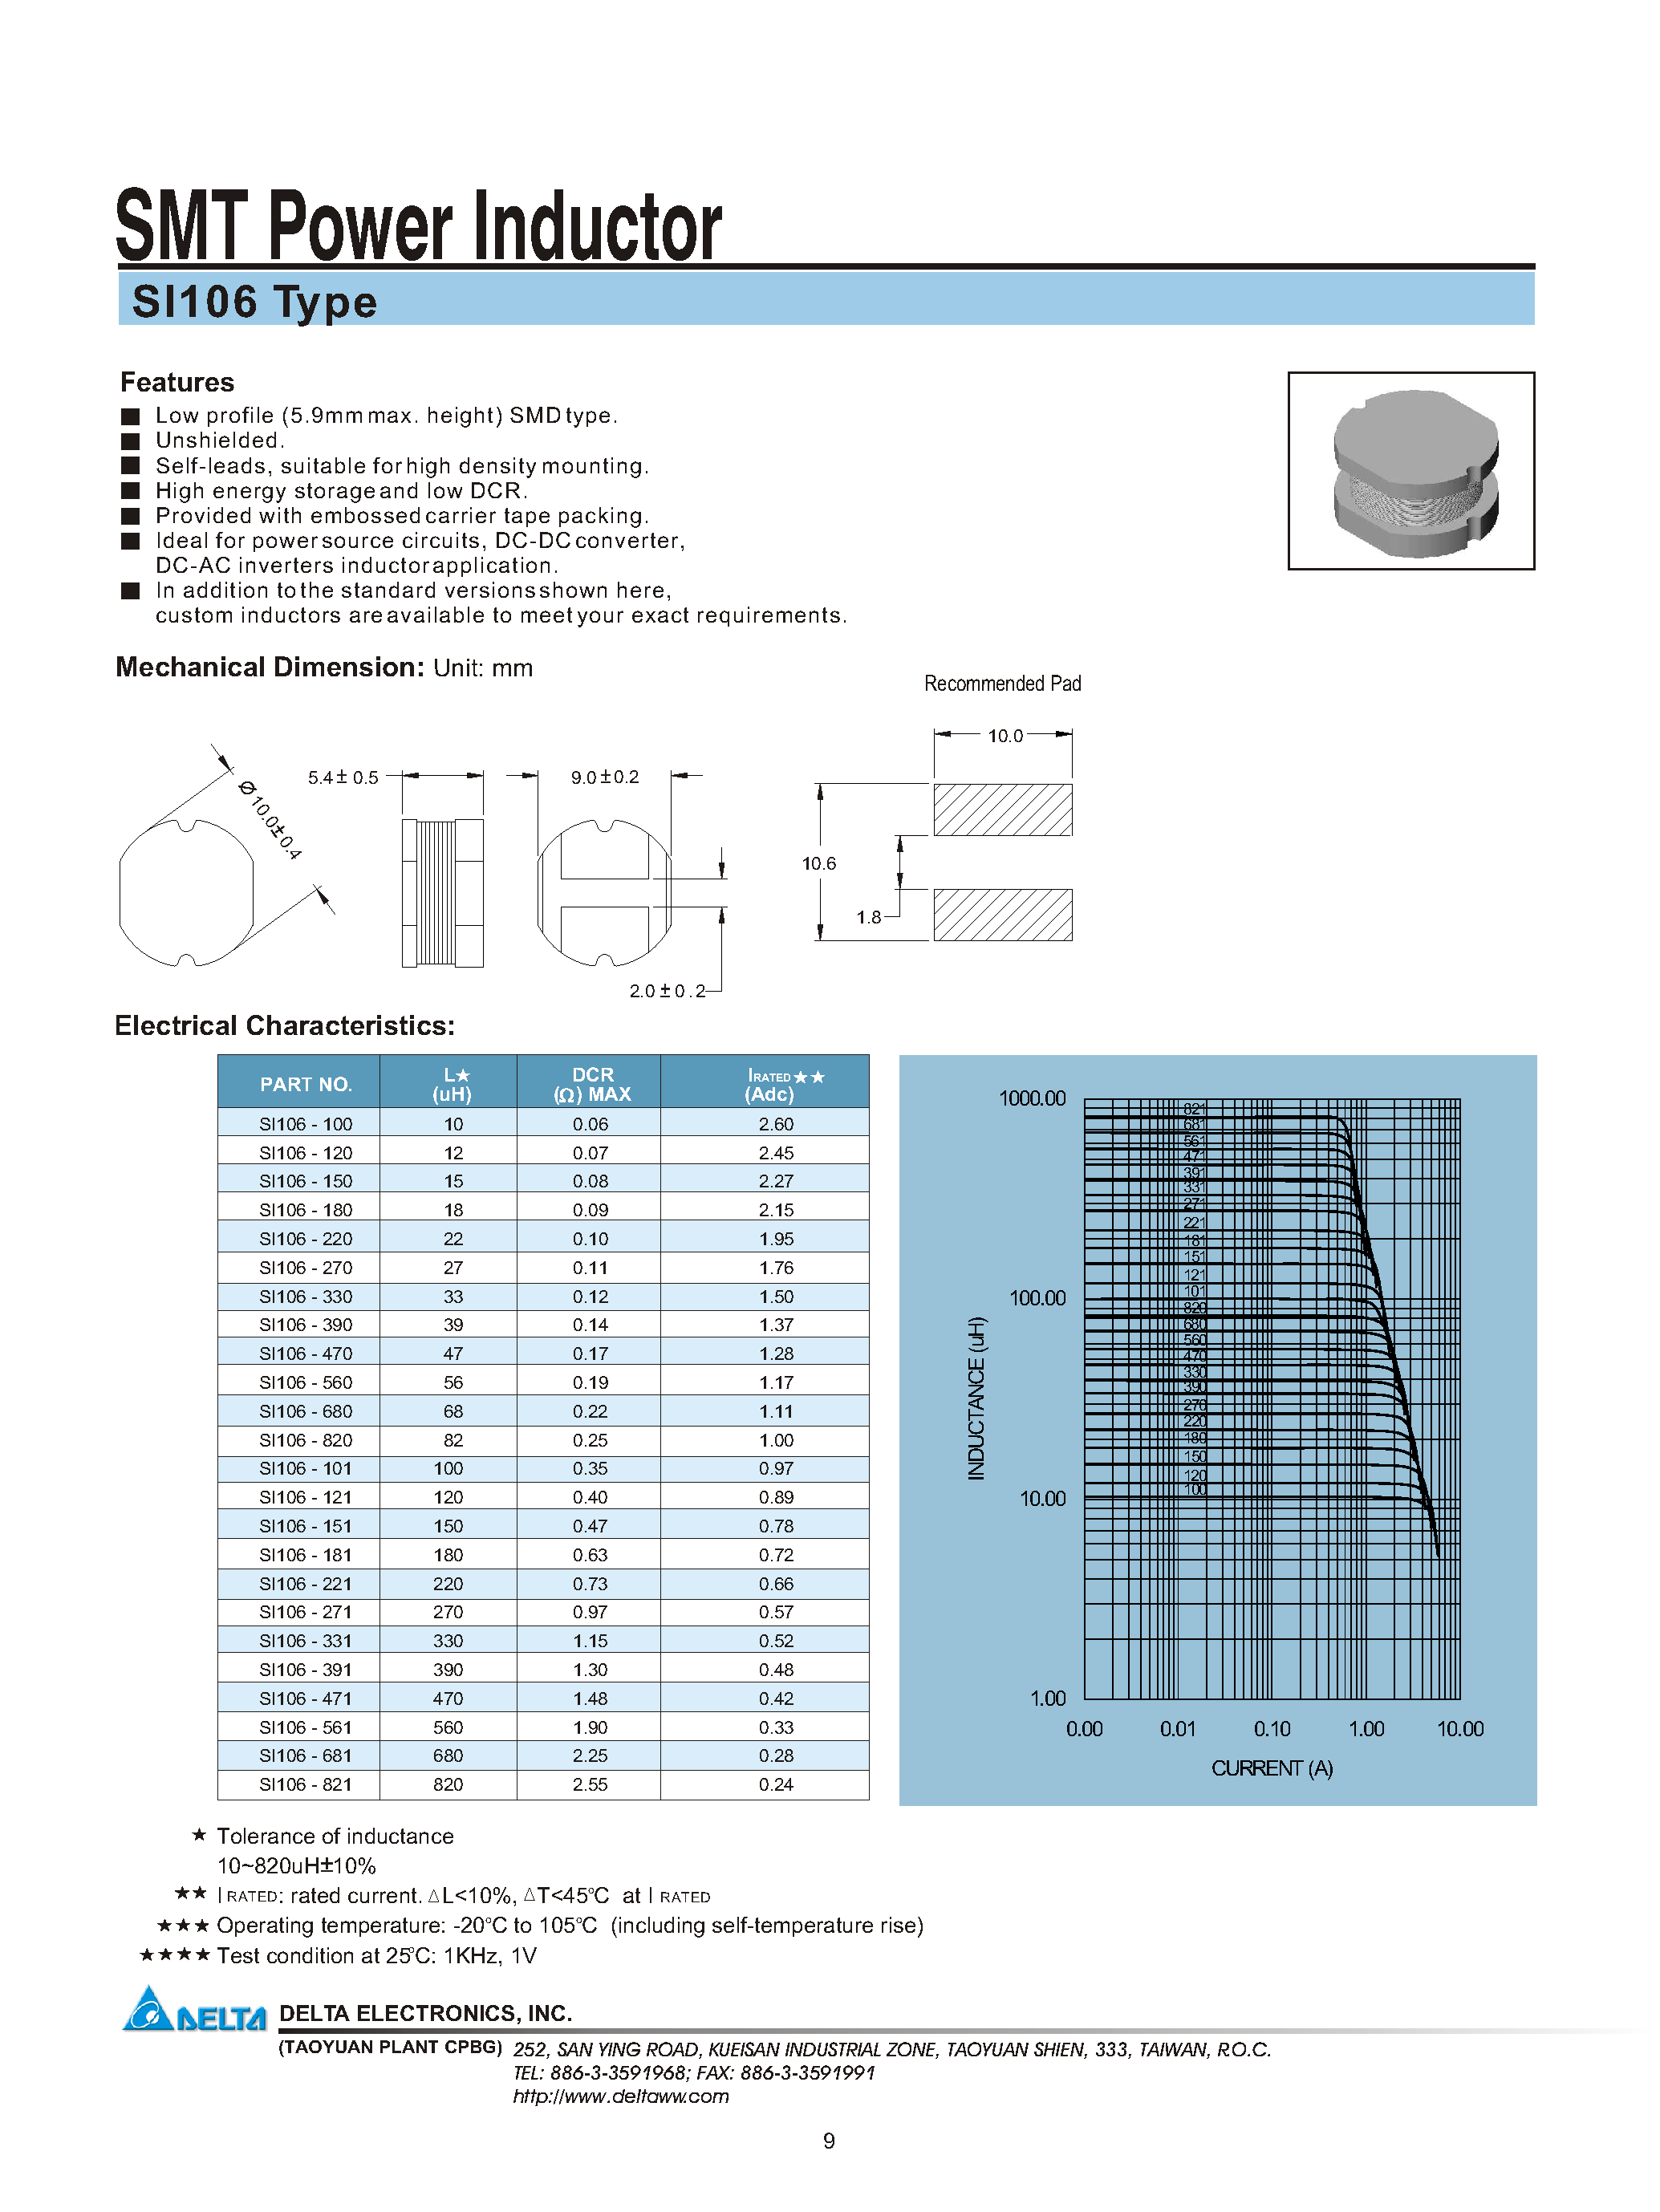 Datasheet SI106-100 - SMT Power Inductor page 1